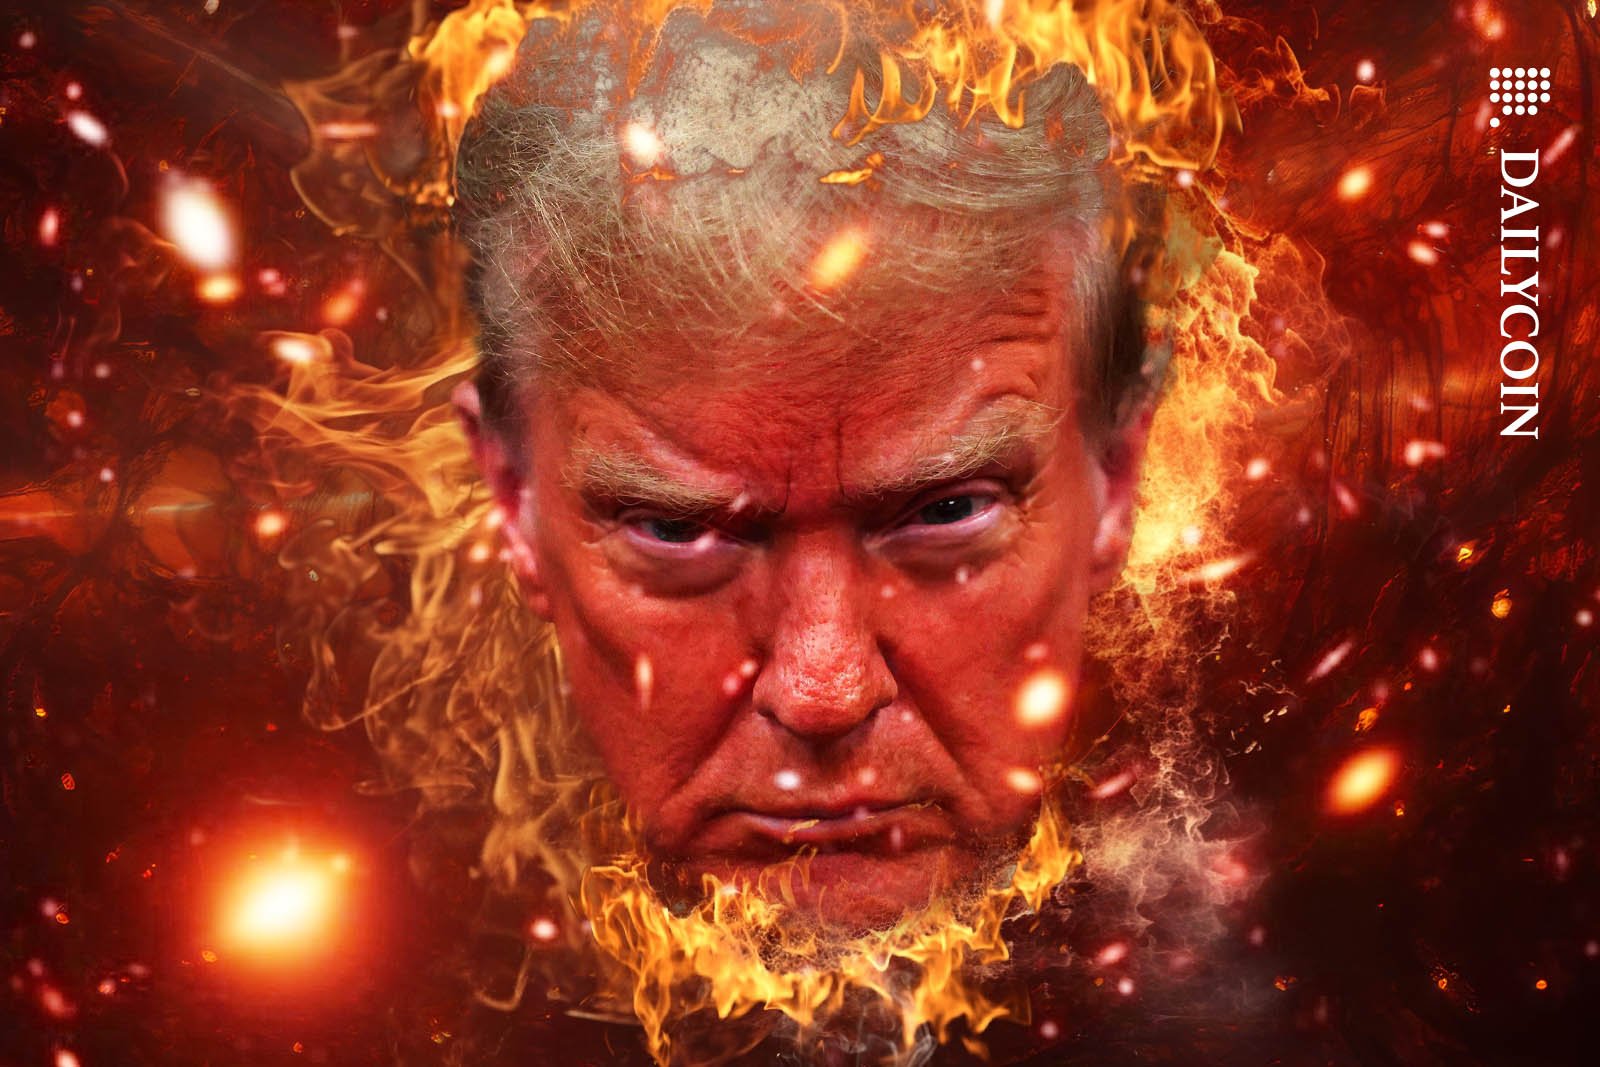 Angry Trump face surrounded by fire and smoke.